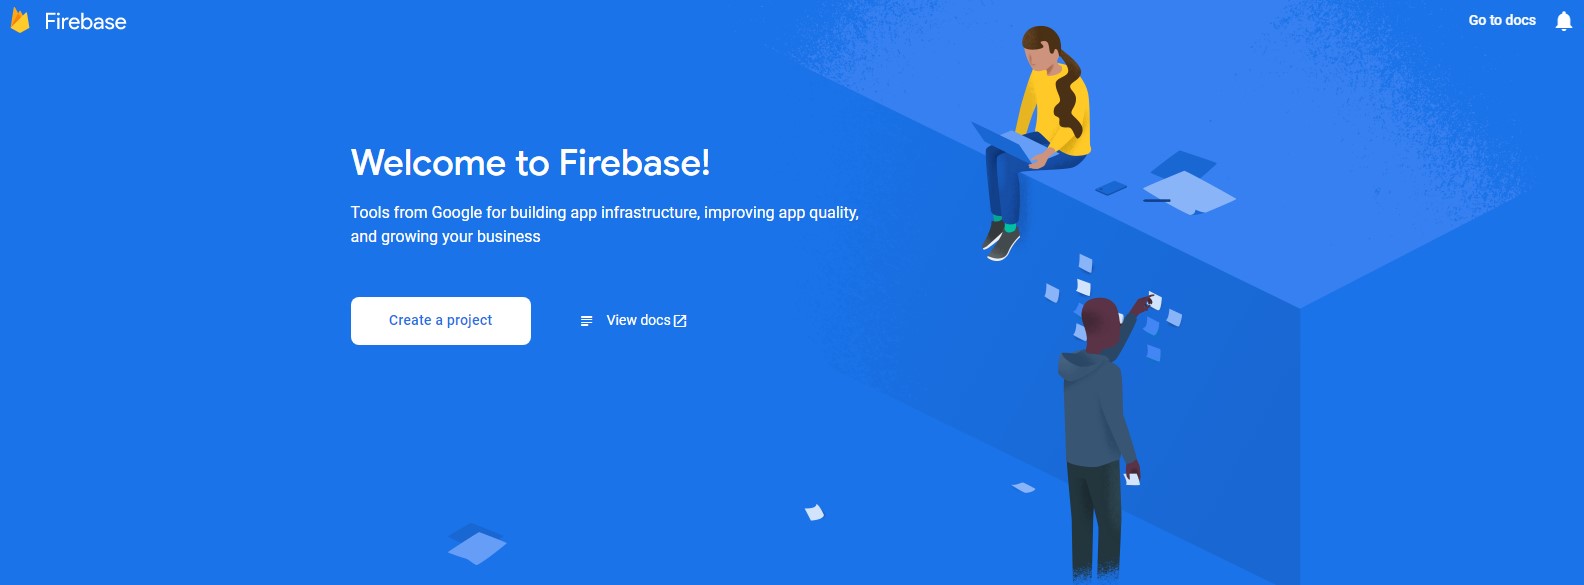 _images/firebase_android_add.jpg